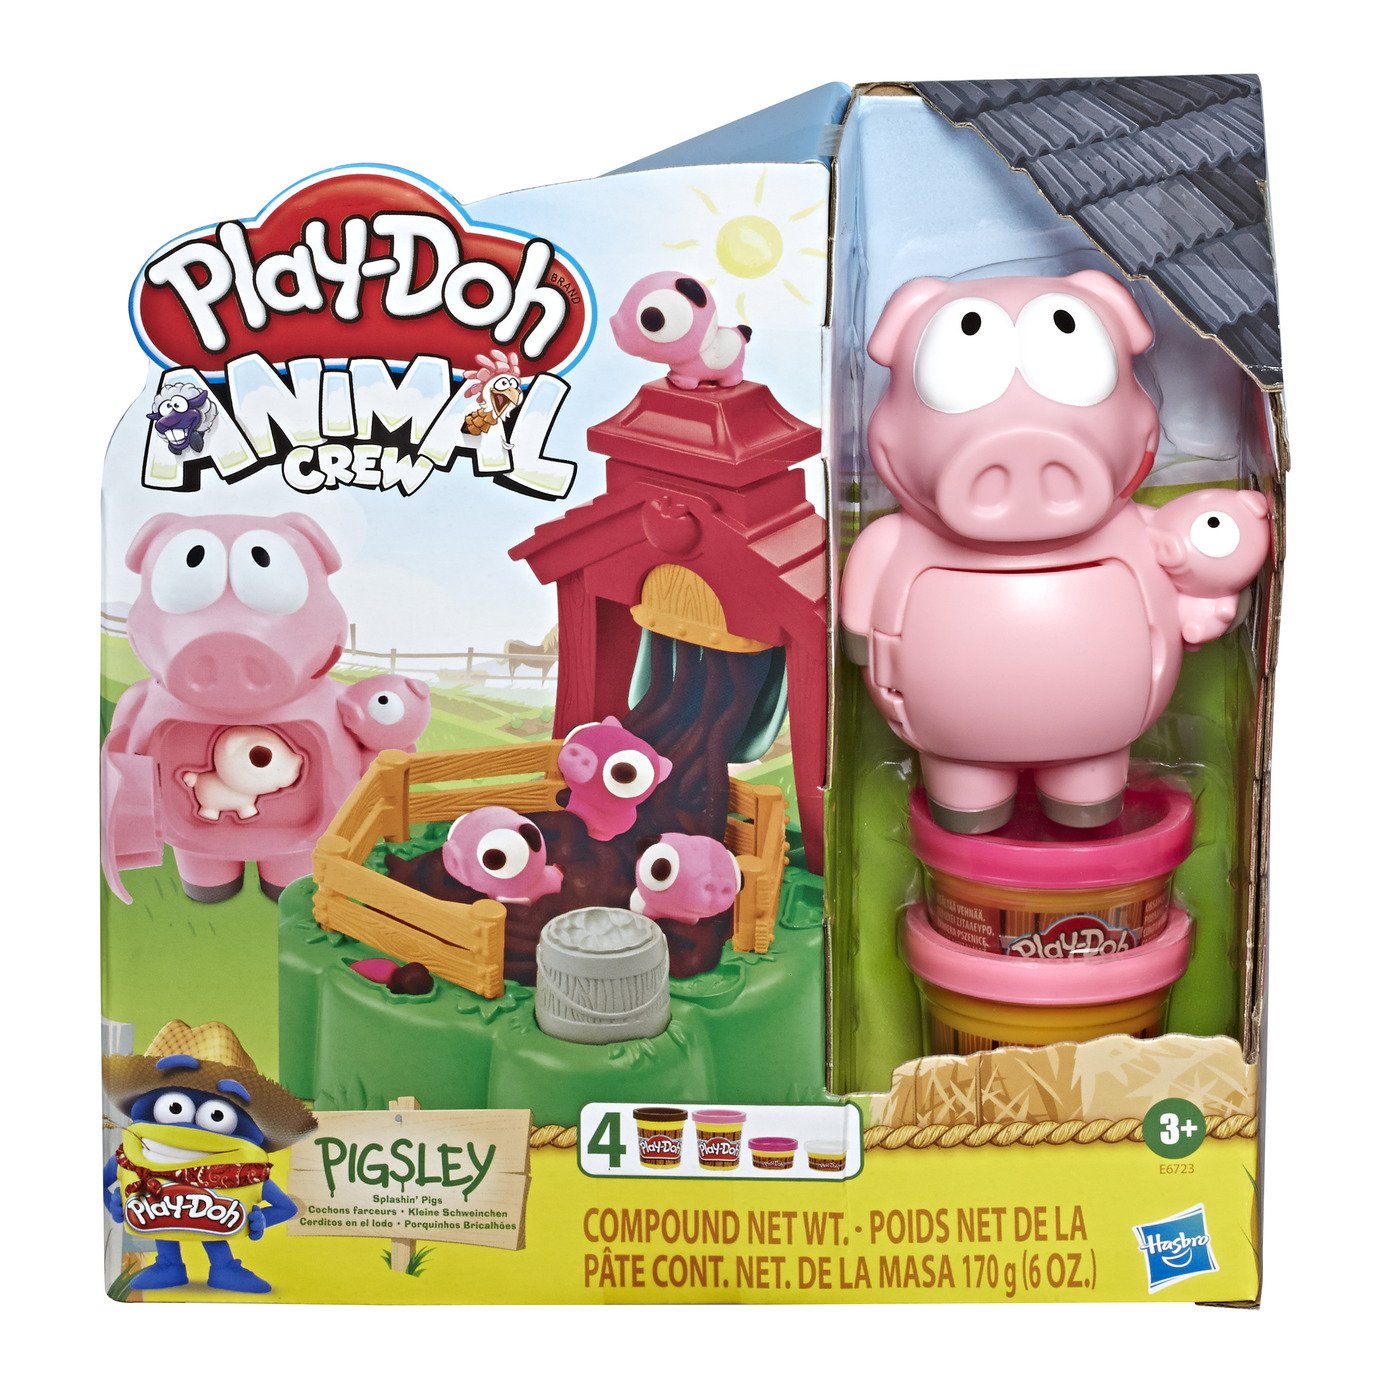 Play-Doh Animal, Pigsley and her Splashin' Pigs Farm Playset Review